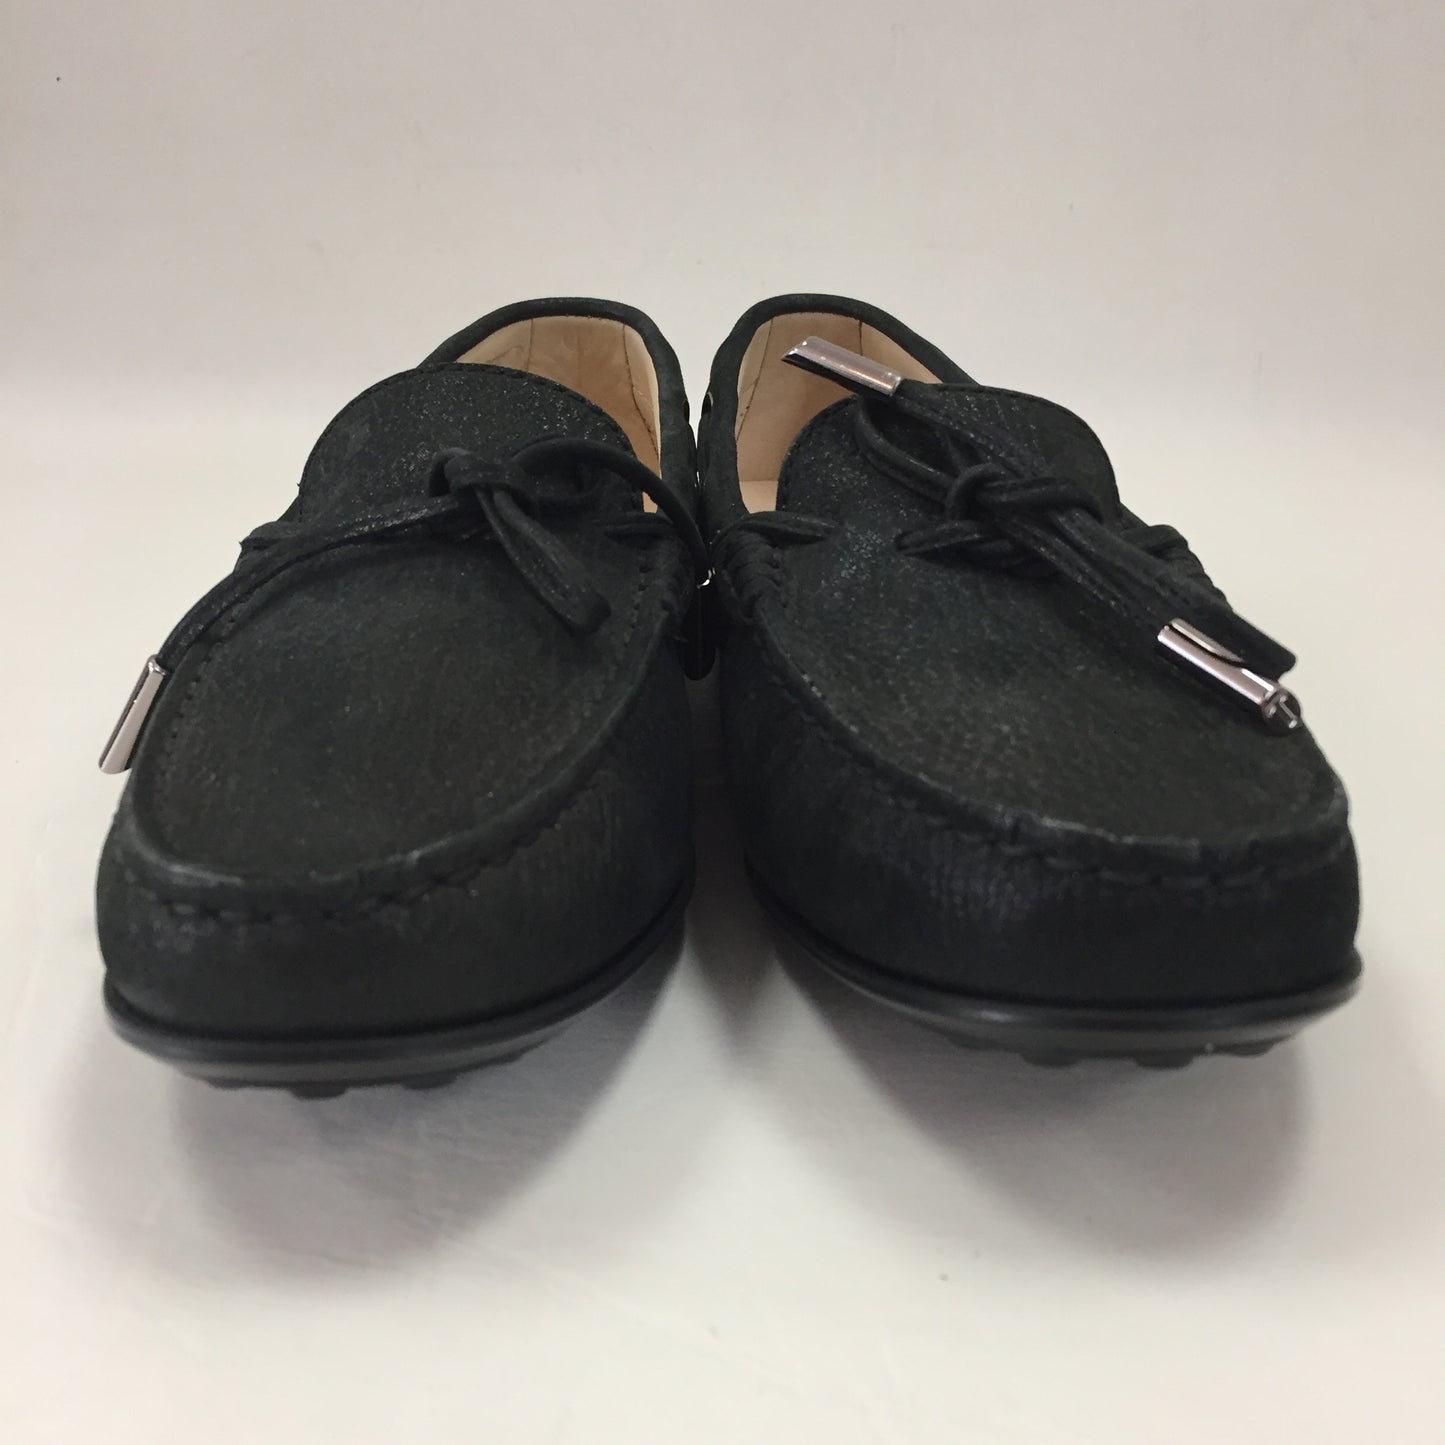 Authentic Tod's Black Electric Suede Driving Moccasins Women's Size 7